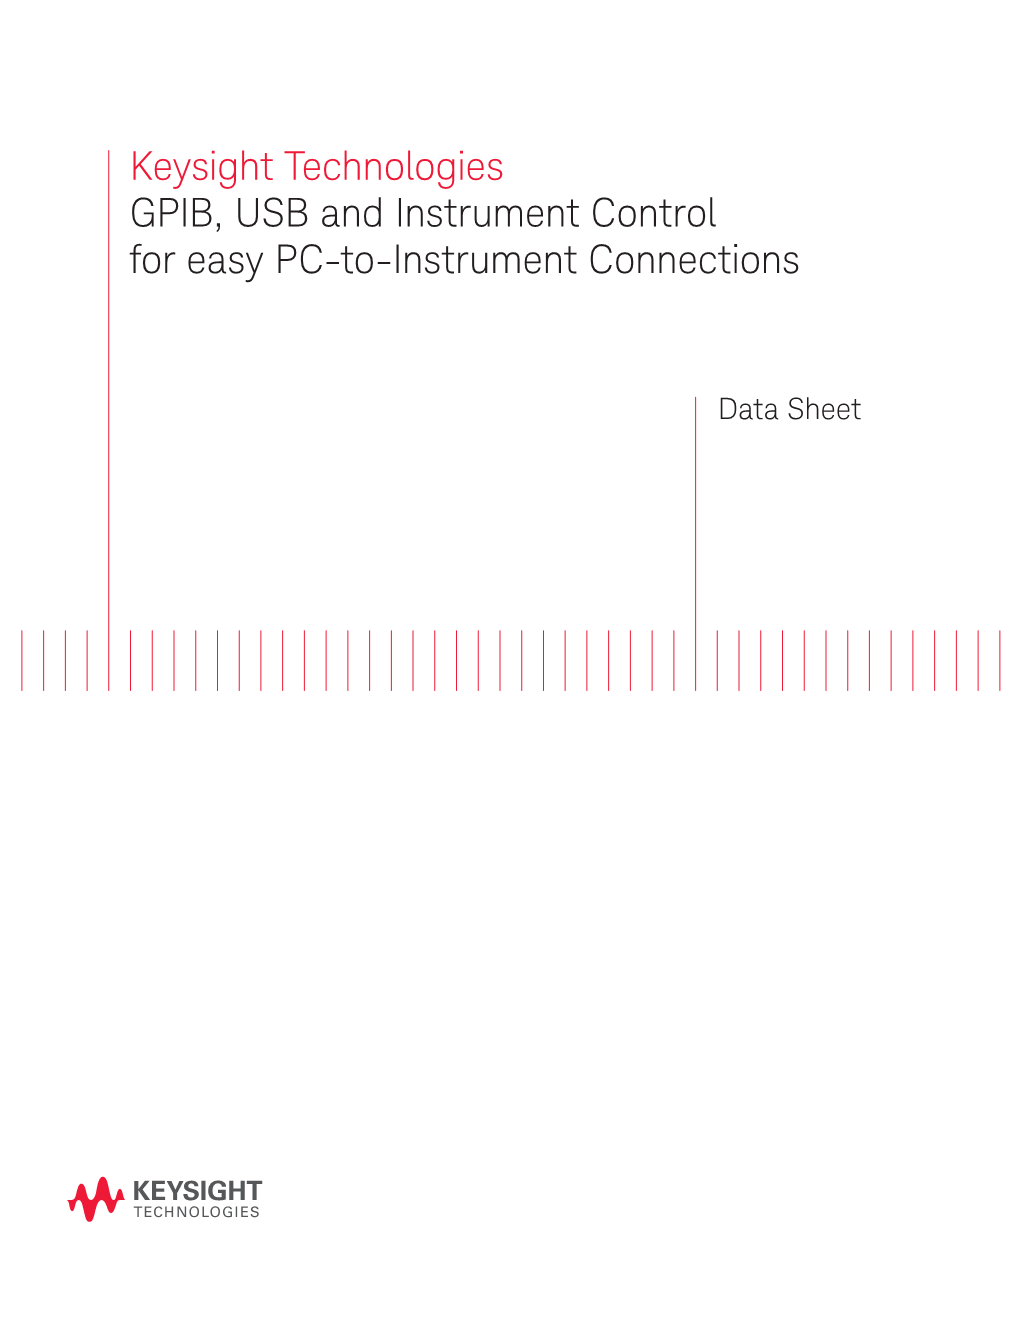 Keysight Technologies GPIB, USB and Instrument Control for Easy PC-To-Instrument Connections